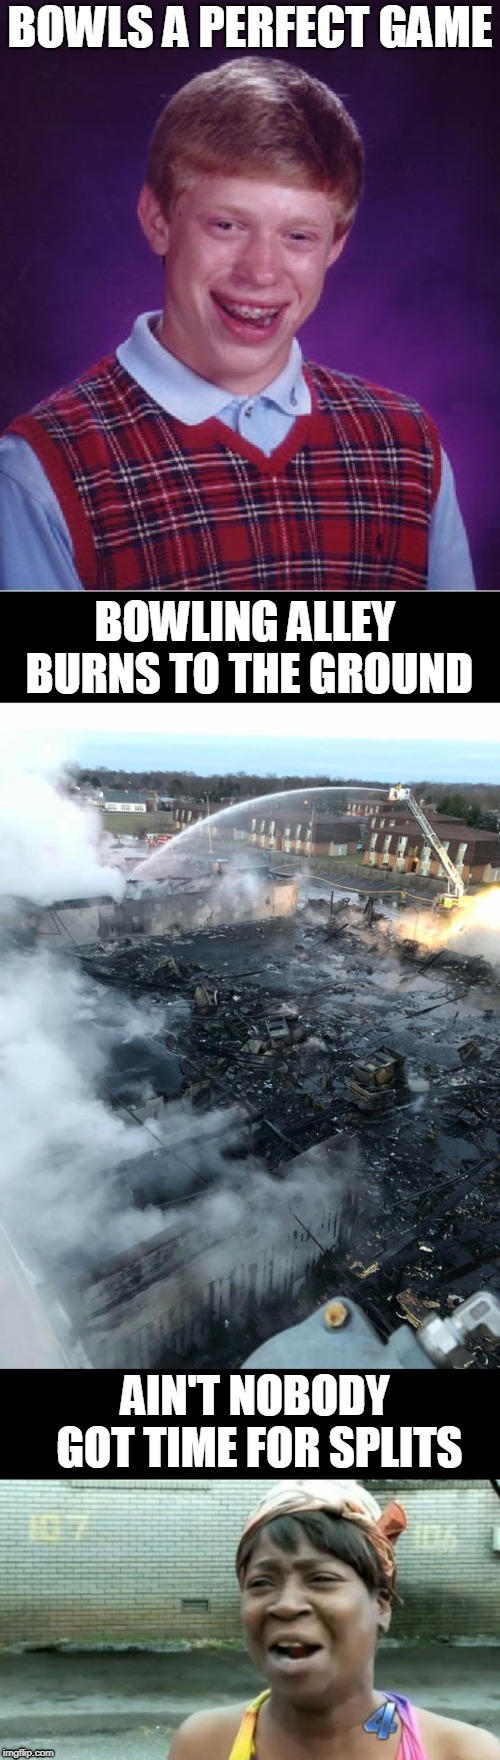  BOWLS A PERFECT GAME; BOWLING ALLEY BURNS TO THE GROUND; AIN'T NOBODY GOT TIME FOR SPLITS | image tagged in memes,bad luck brian,aint nobody got time for that,aaaaand its gone,bowling,fire | made w/ Imgflip meme maker